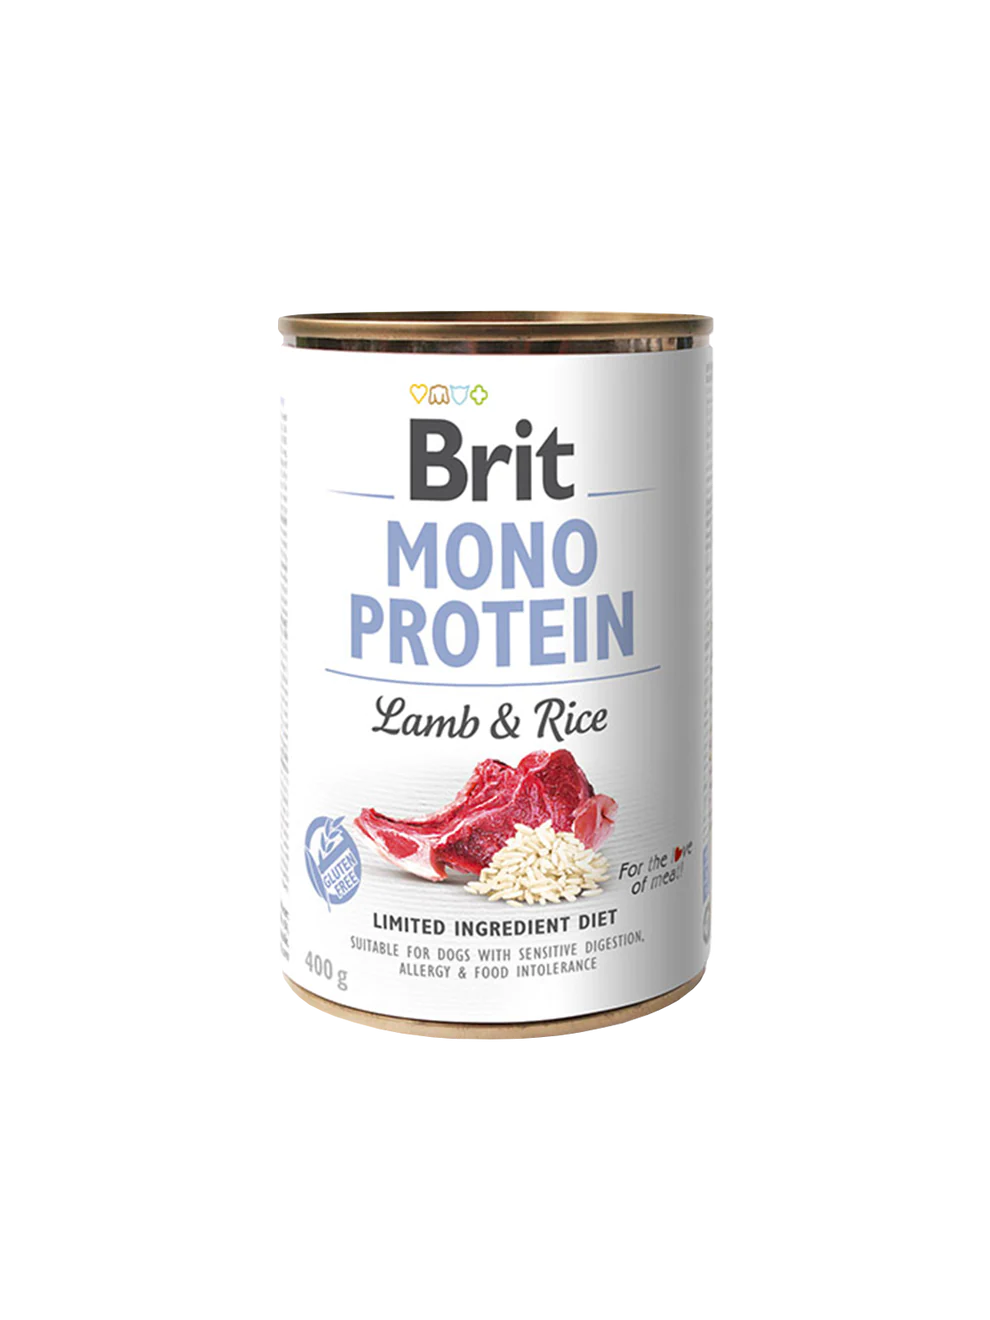 Brit Mono Protein Lamb & Rice 6 pack of 400g